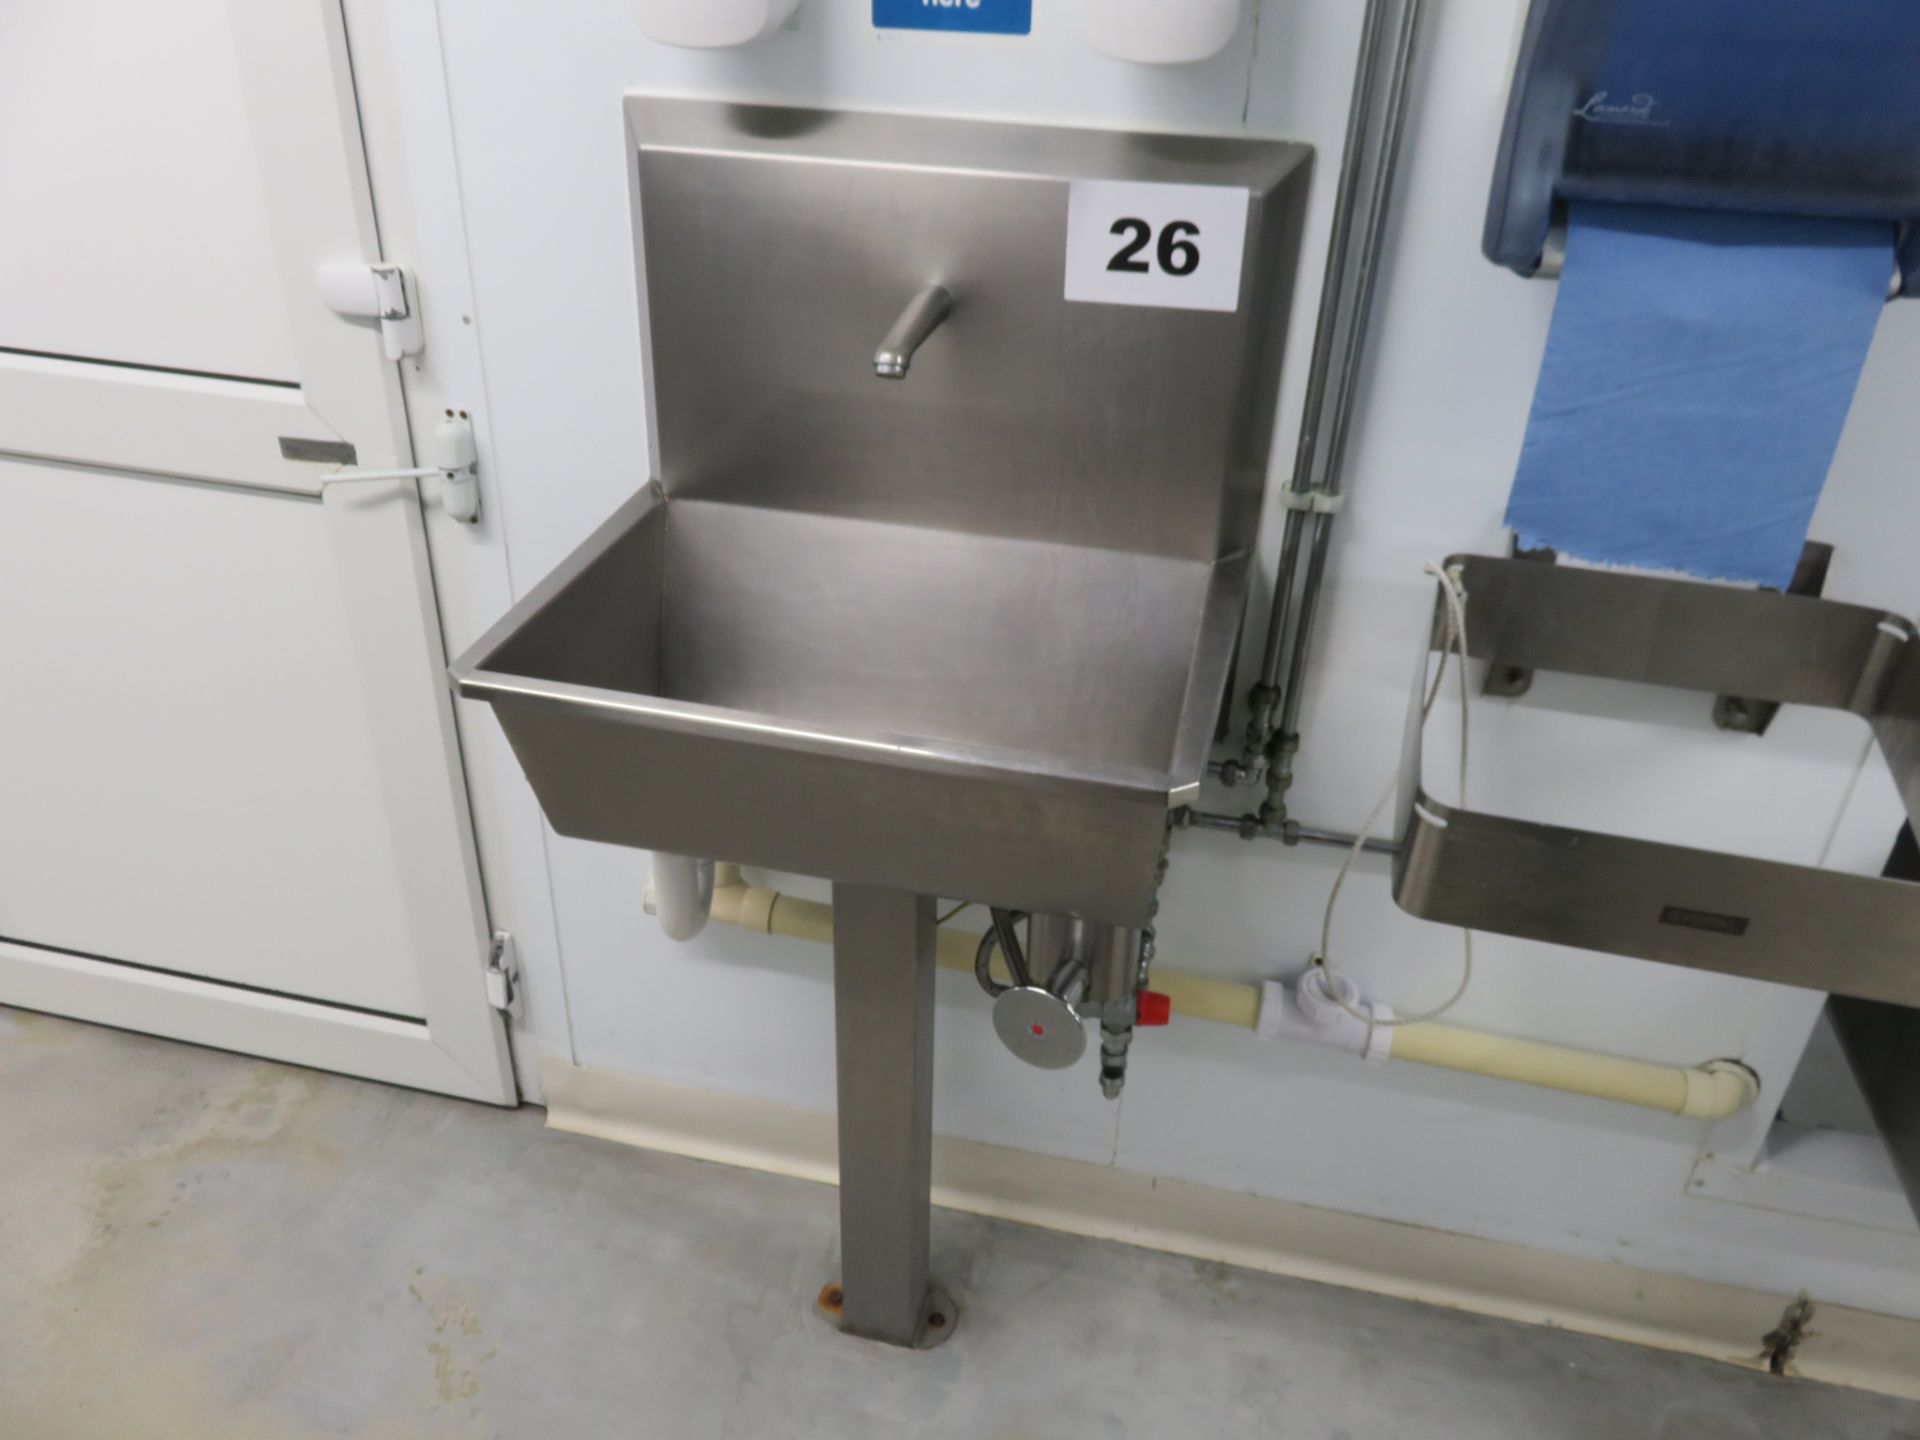 S/S SINGLE KNEE OPERATED SINK. - Image 2 of 2